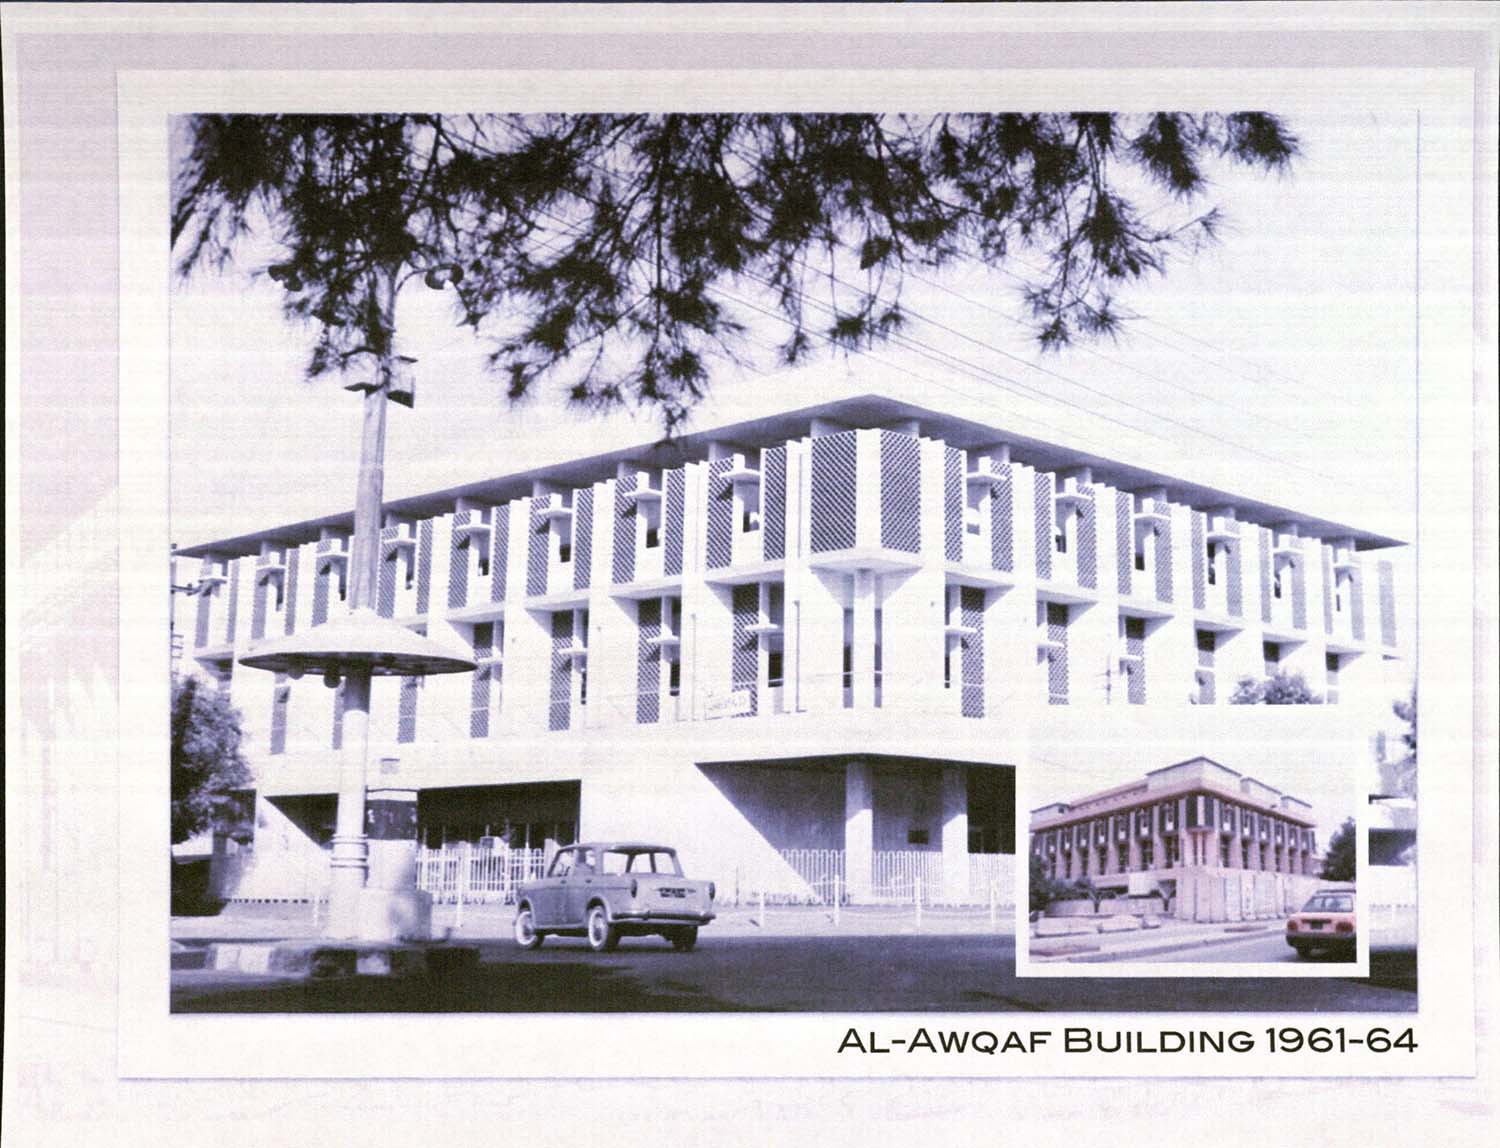 Combined images of the Awqaf building's exterior. Smaller image shows the roof with more contemporary additions.